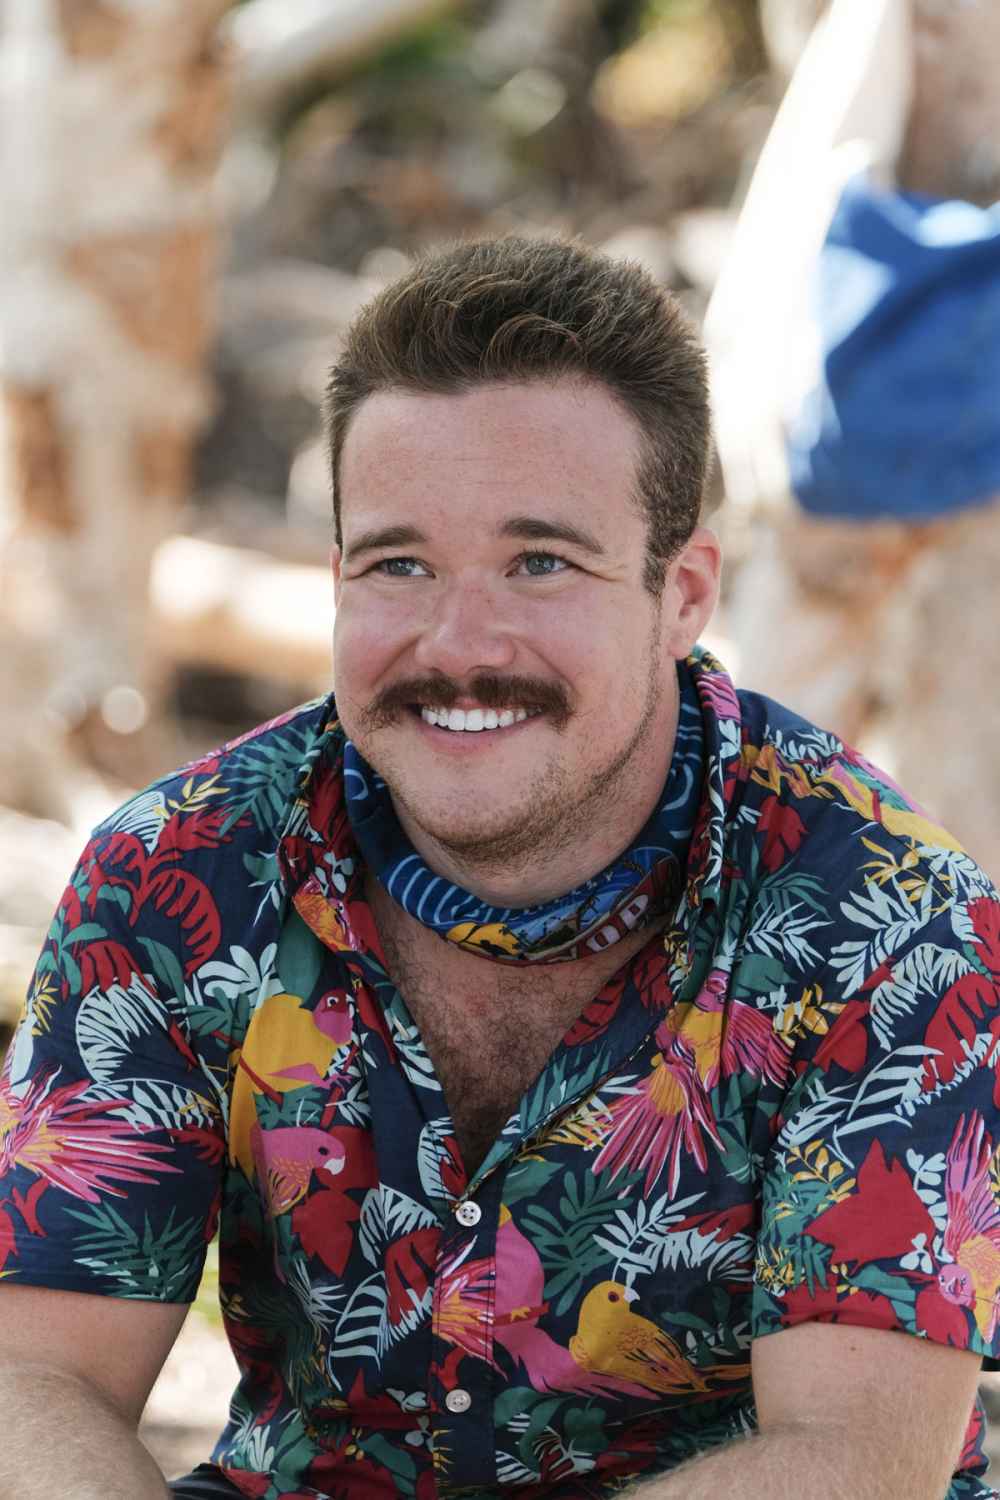 Zeke Smith was outed as transgender by fellow contestant Jeff Varner